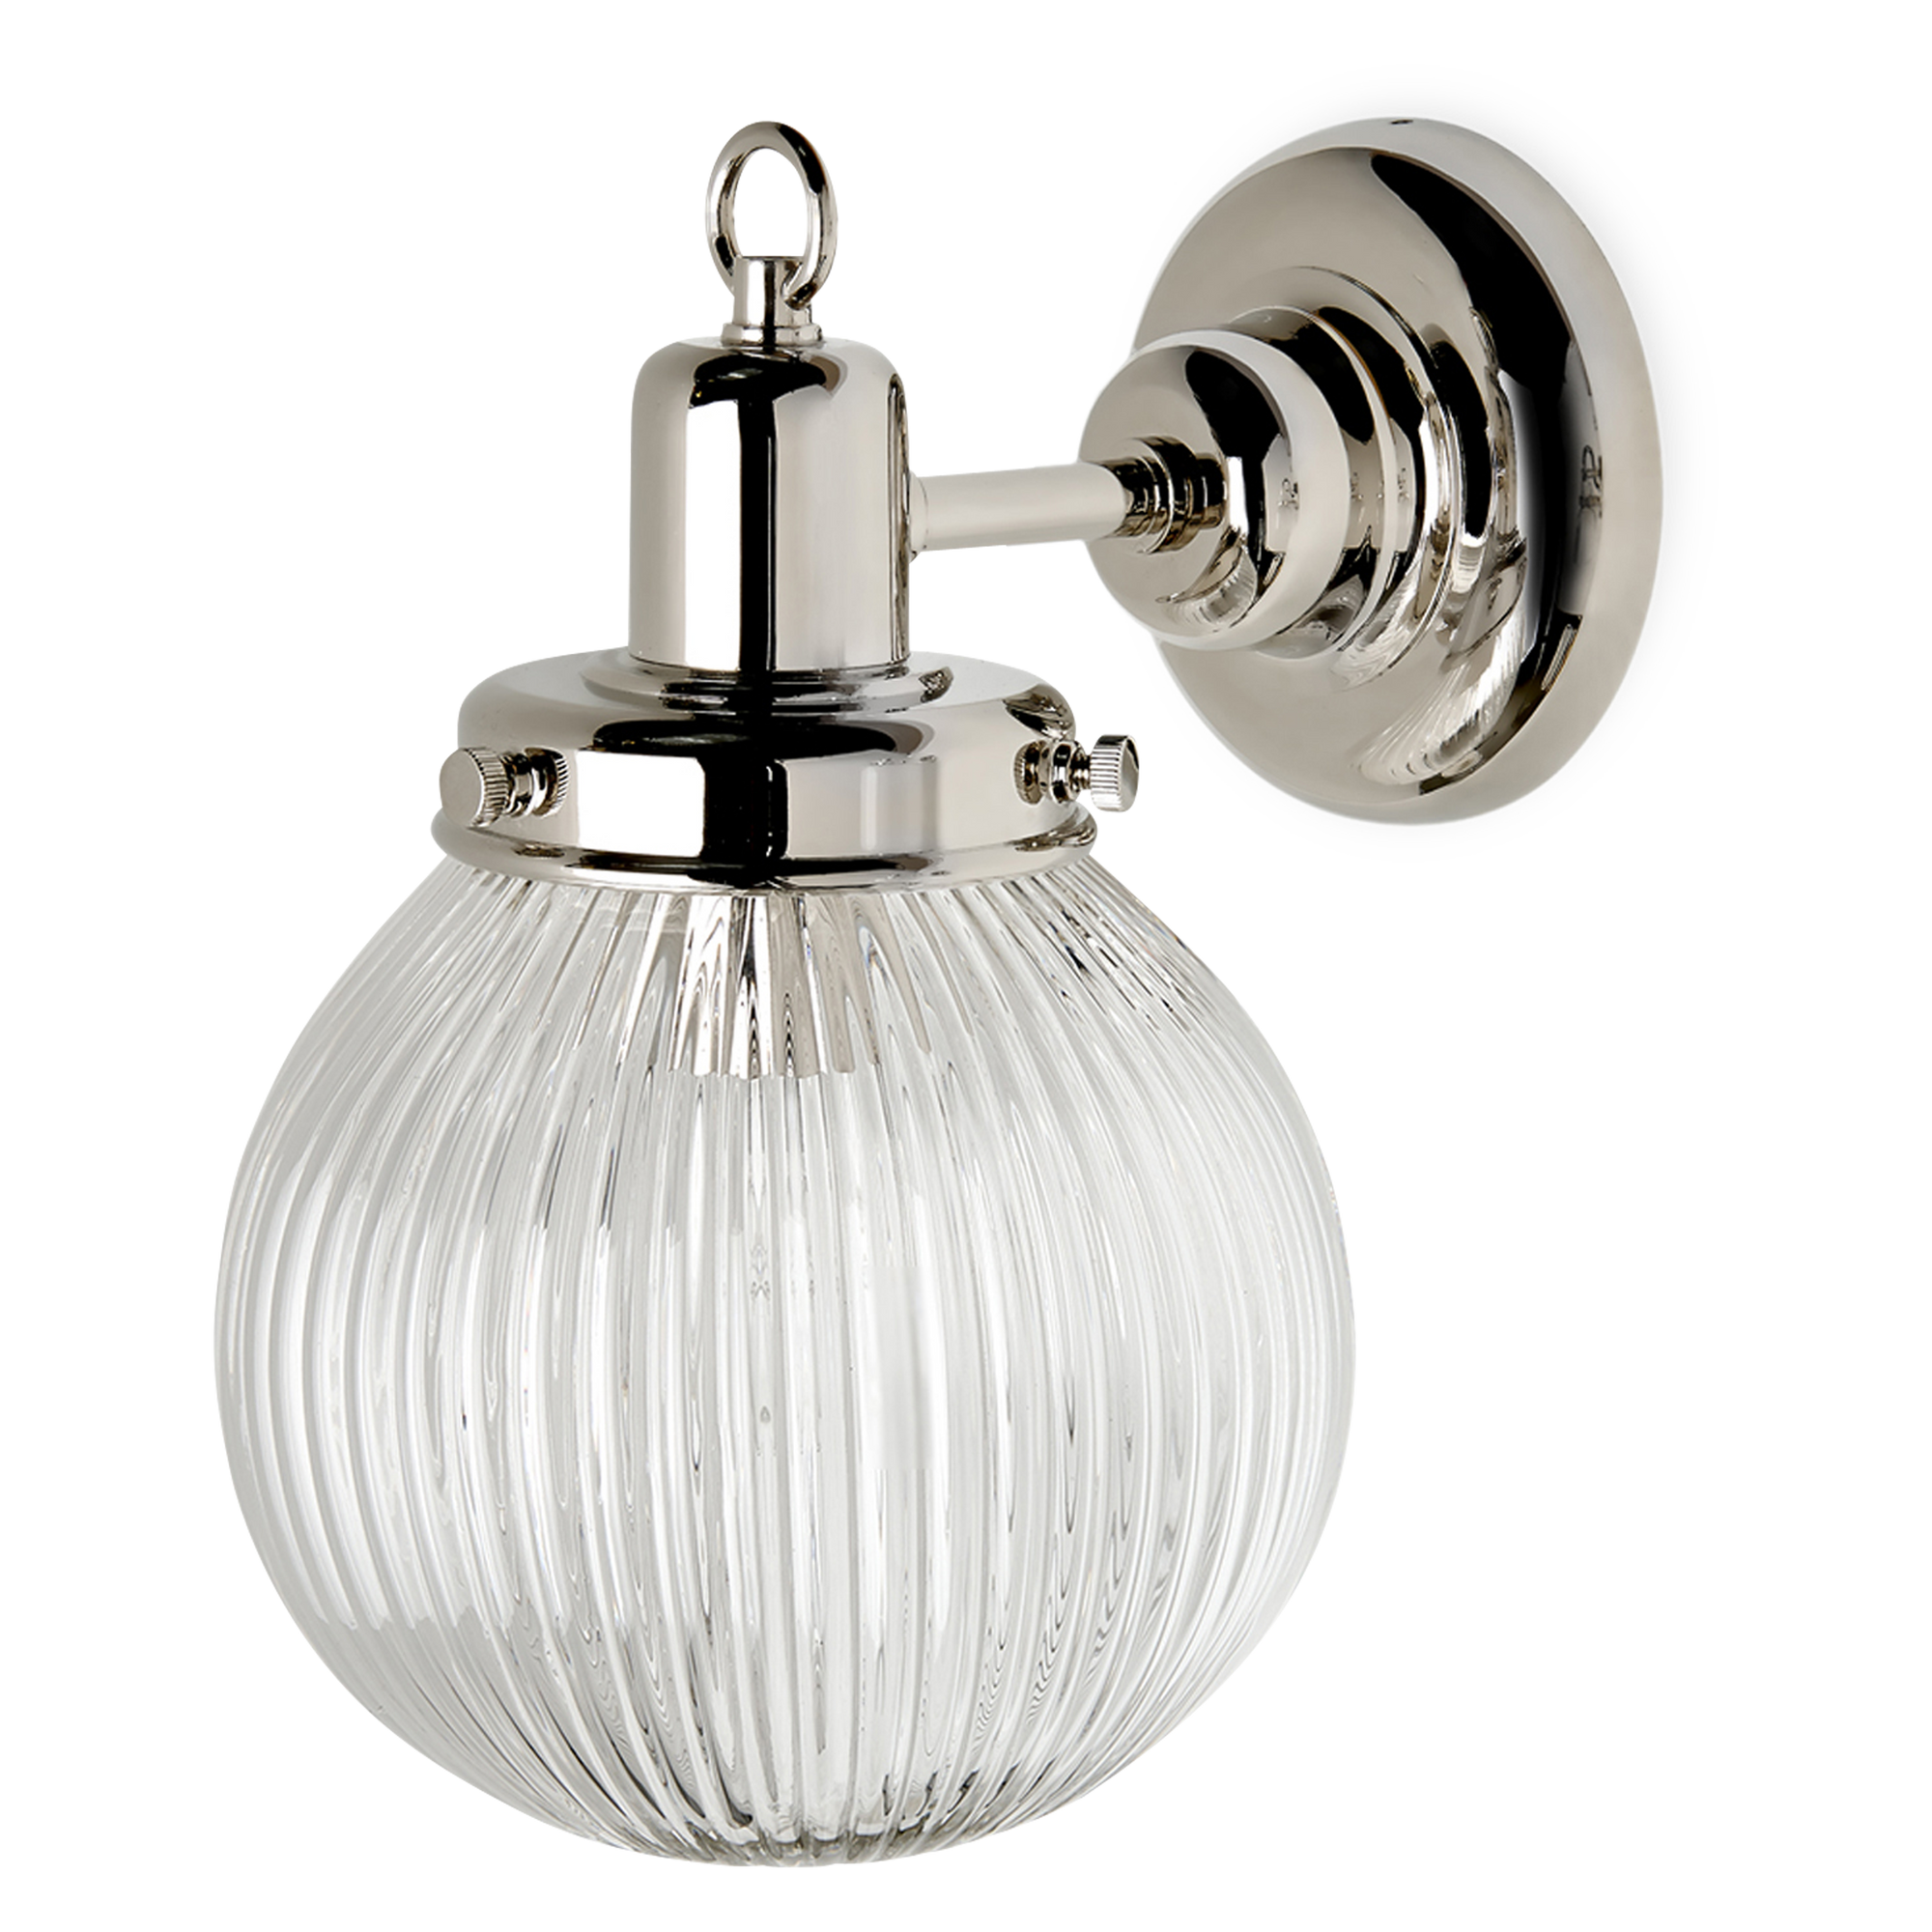 The large, fluted glass shade of Aurora is an update of early 20th Century prismatic lighting.